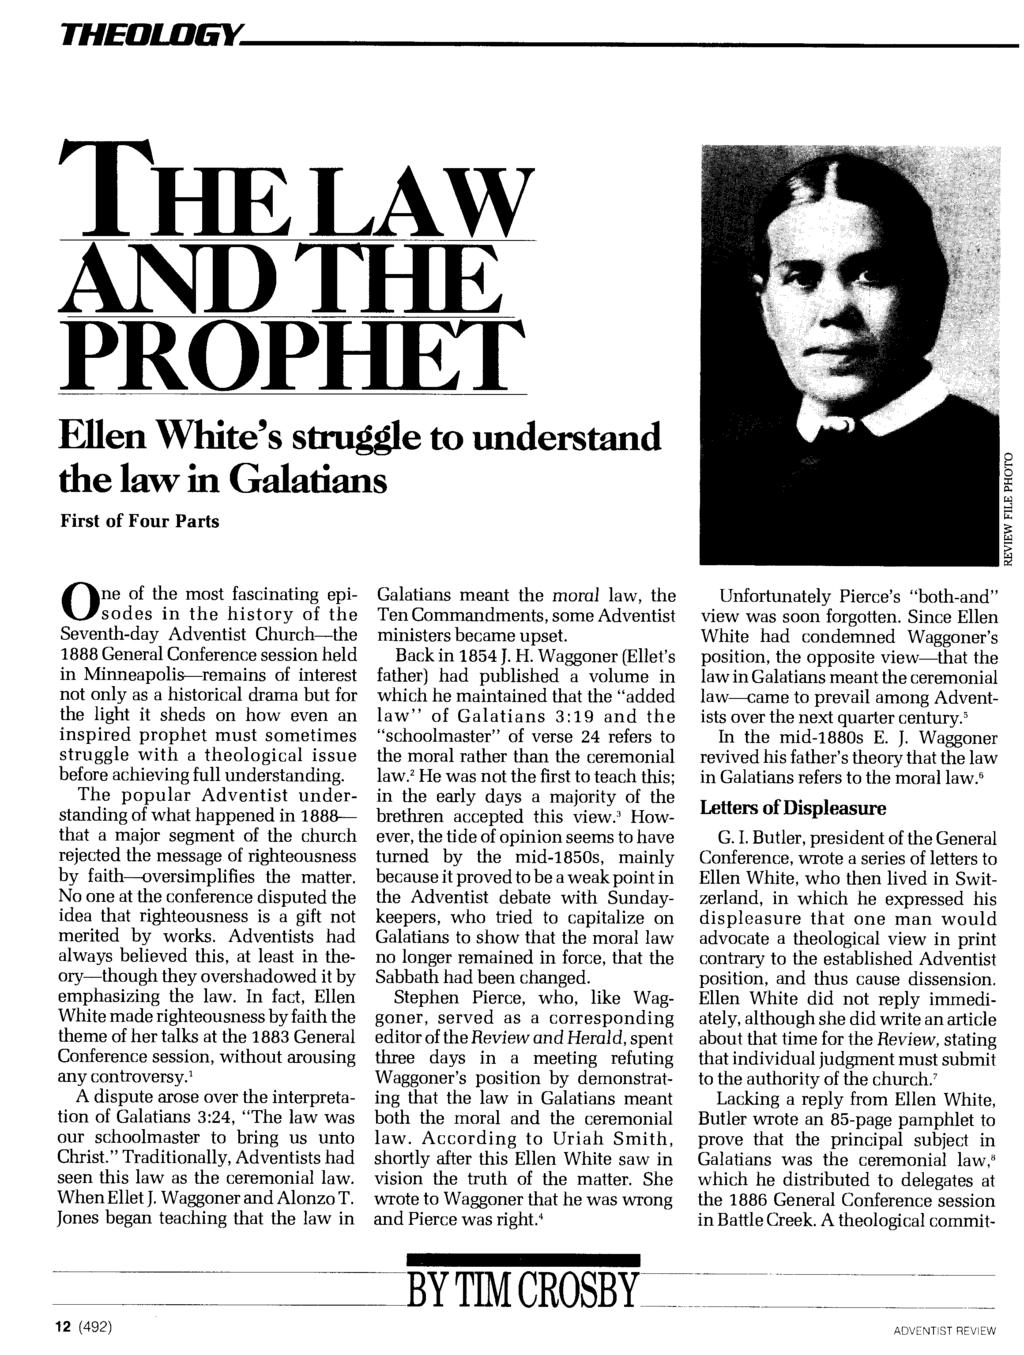 THEOLOGY THE LAW AND THE PROPHET Ellen White's struggle to understand the law in Galatians First of Four Parts One of the most fascinating episodes in the history of the Seventh-day Adventist Church